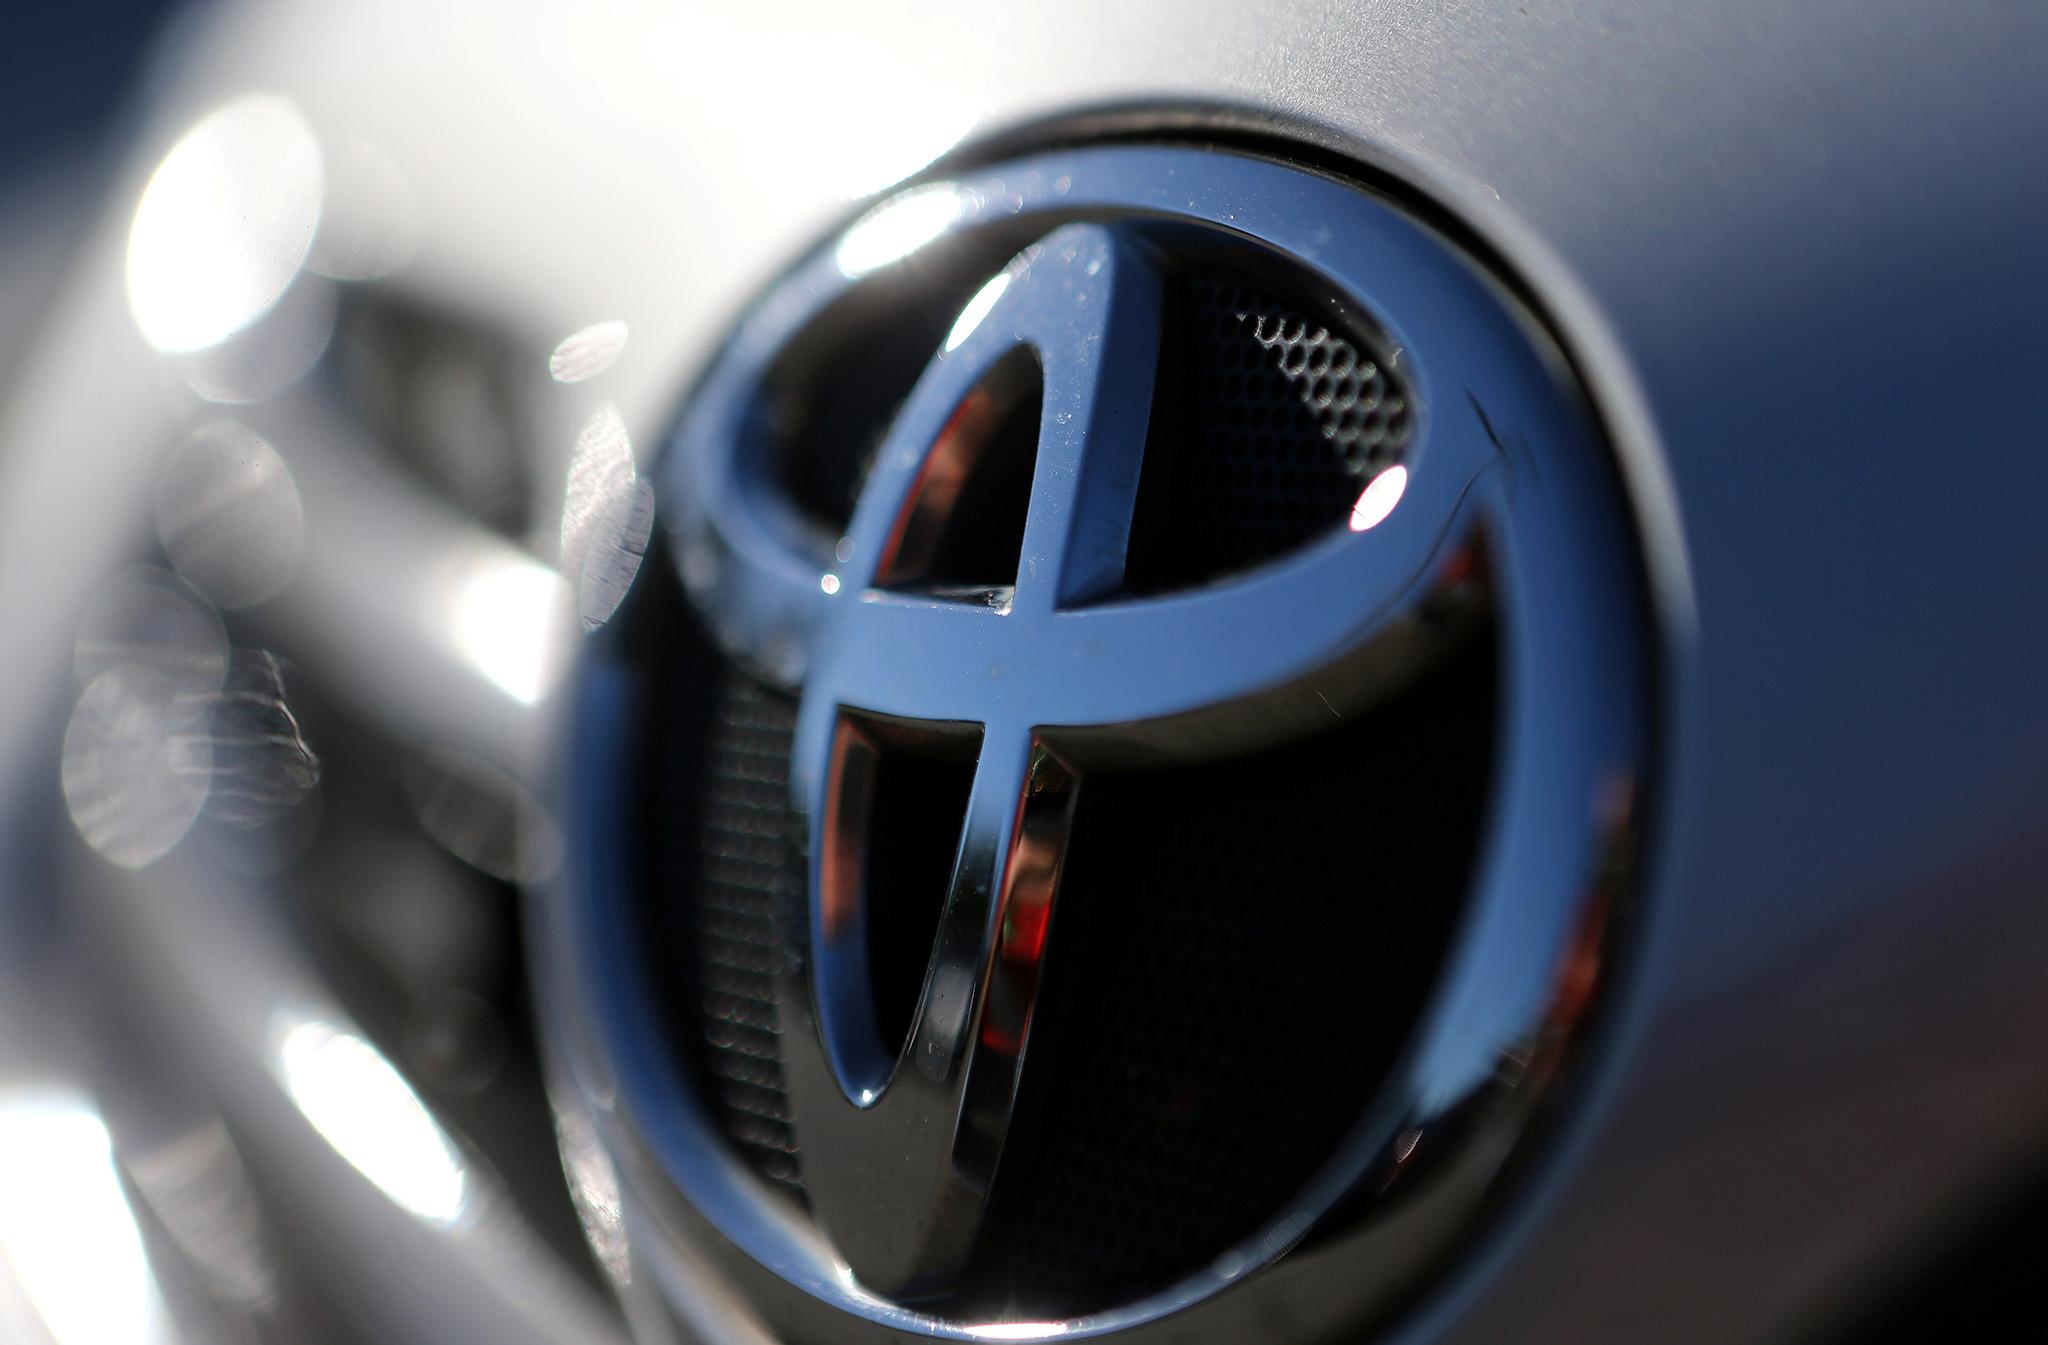 Toyota announced plans in March to begin upgrading its Burnaston plant in central England in preparation for future models at a cost of £240m, after receiving written assurances from London